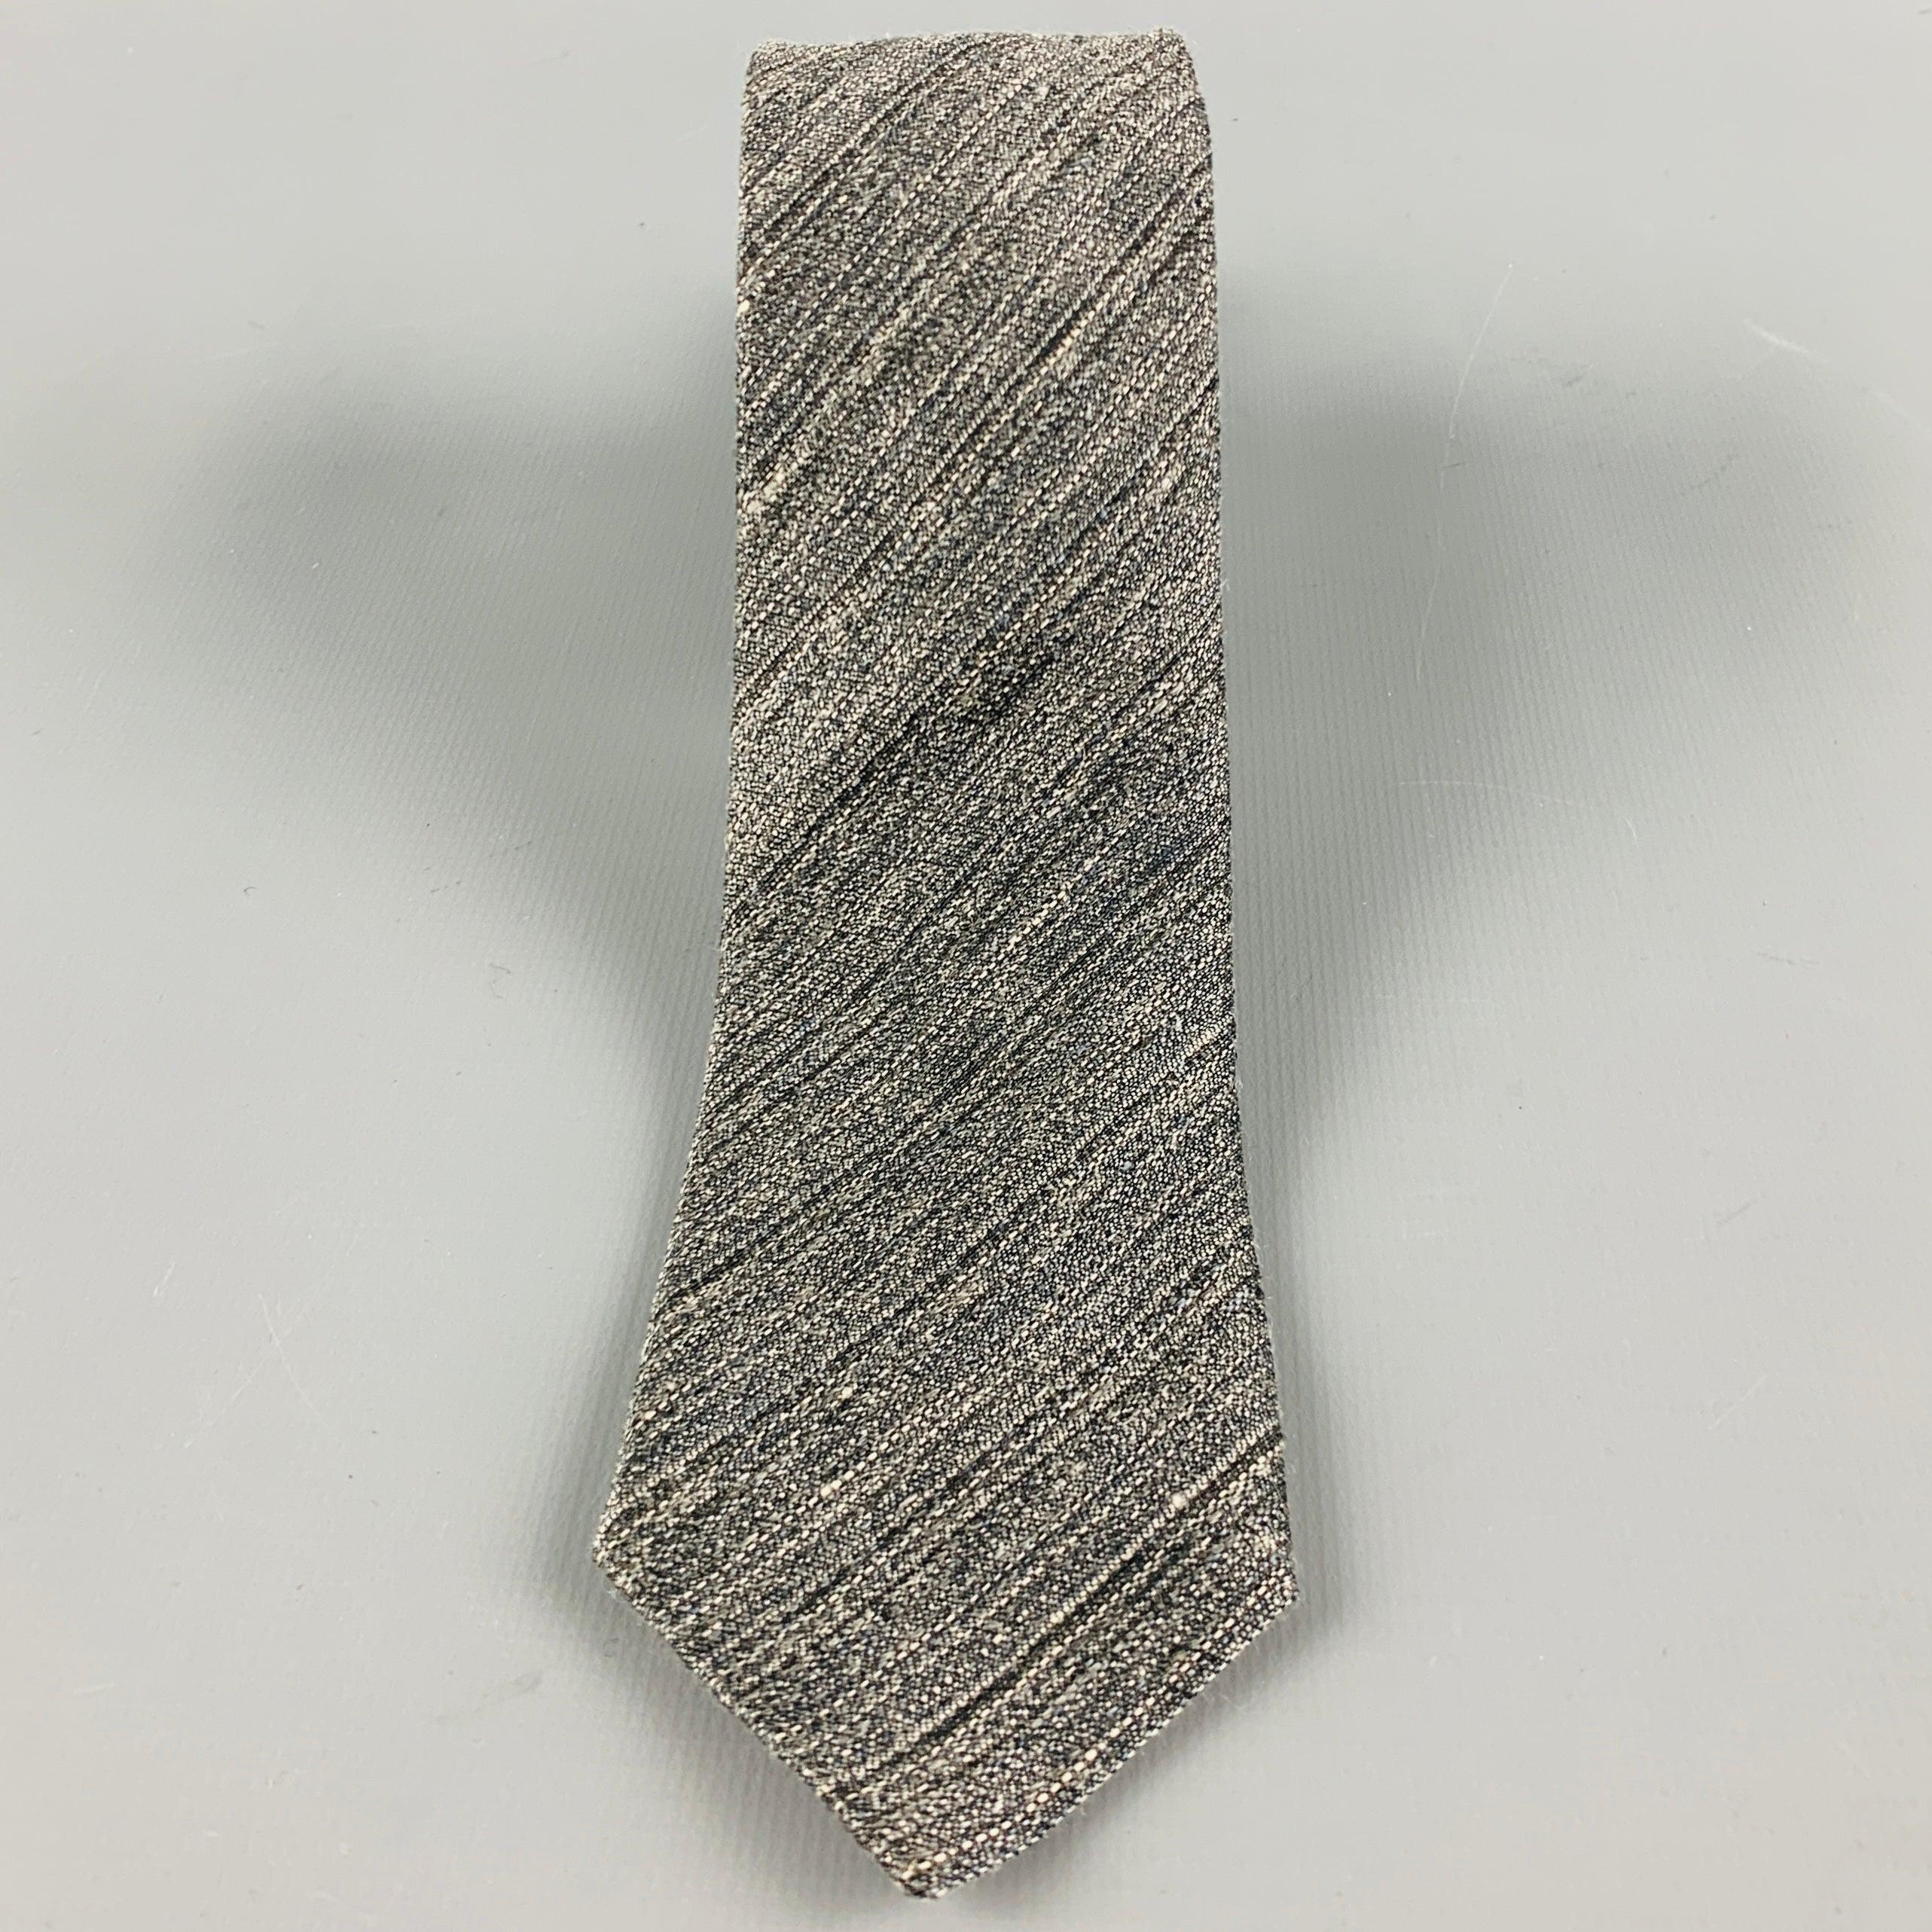 ERMENEGILDO ZEGNA
necktie in a
grey and white linen silk blend fabric featuring a diagonal stripe pattern and skinny style. Made in Italy.Excellent Pre-Owned Condition. 

Measurements: 
  Width: 2 inches Length: 60 inches 
  
  
 
Reference No.: